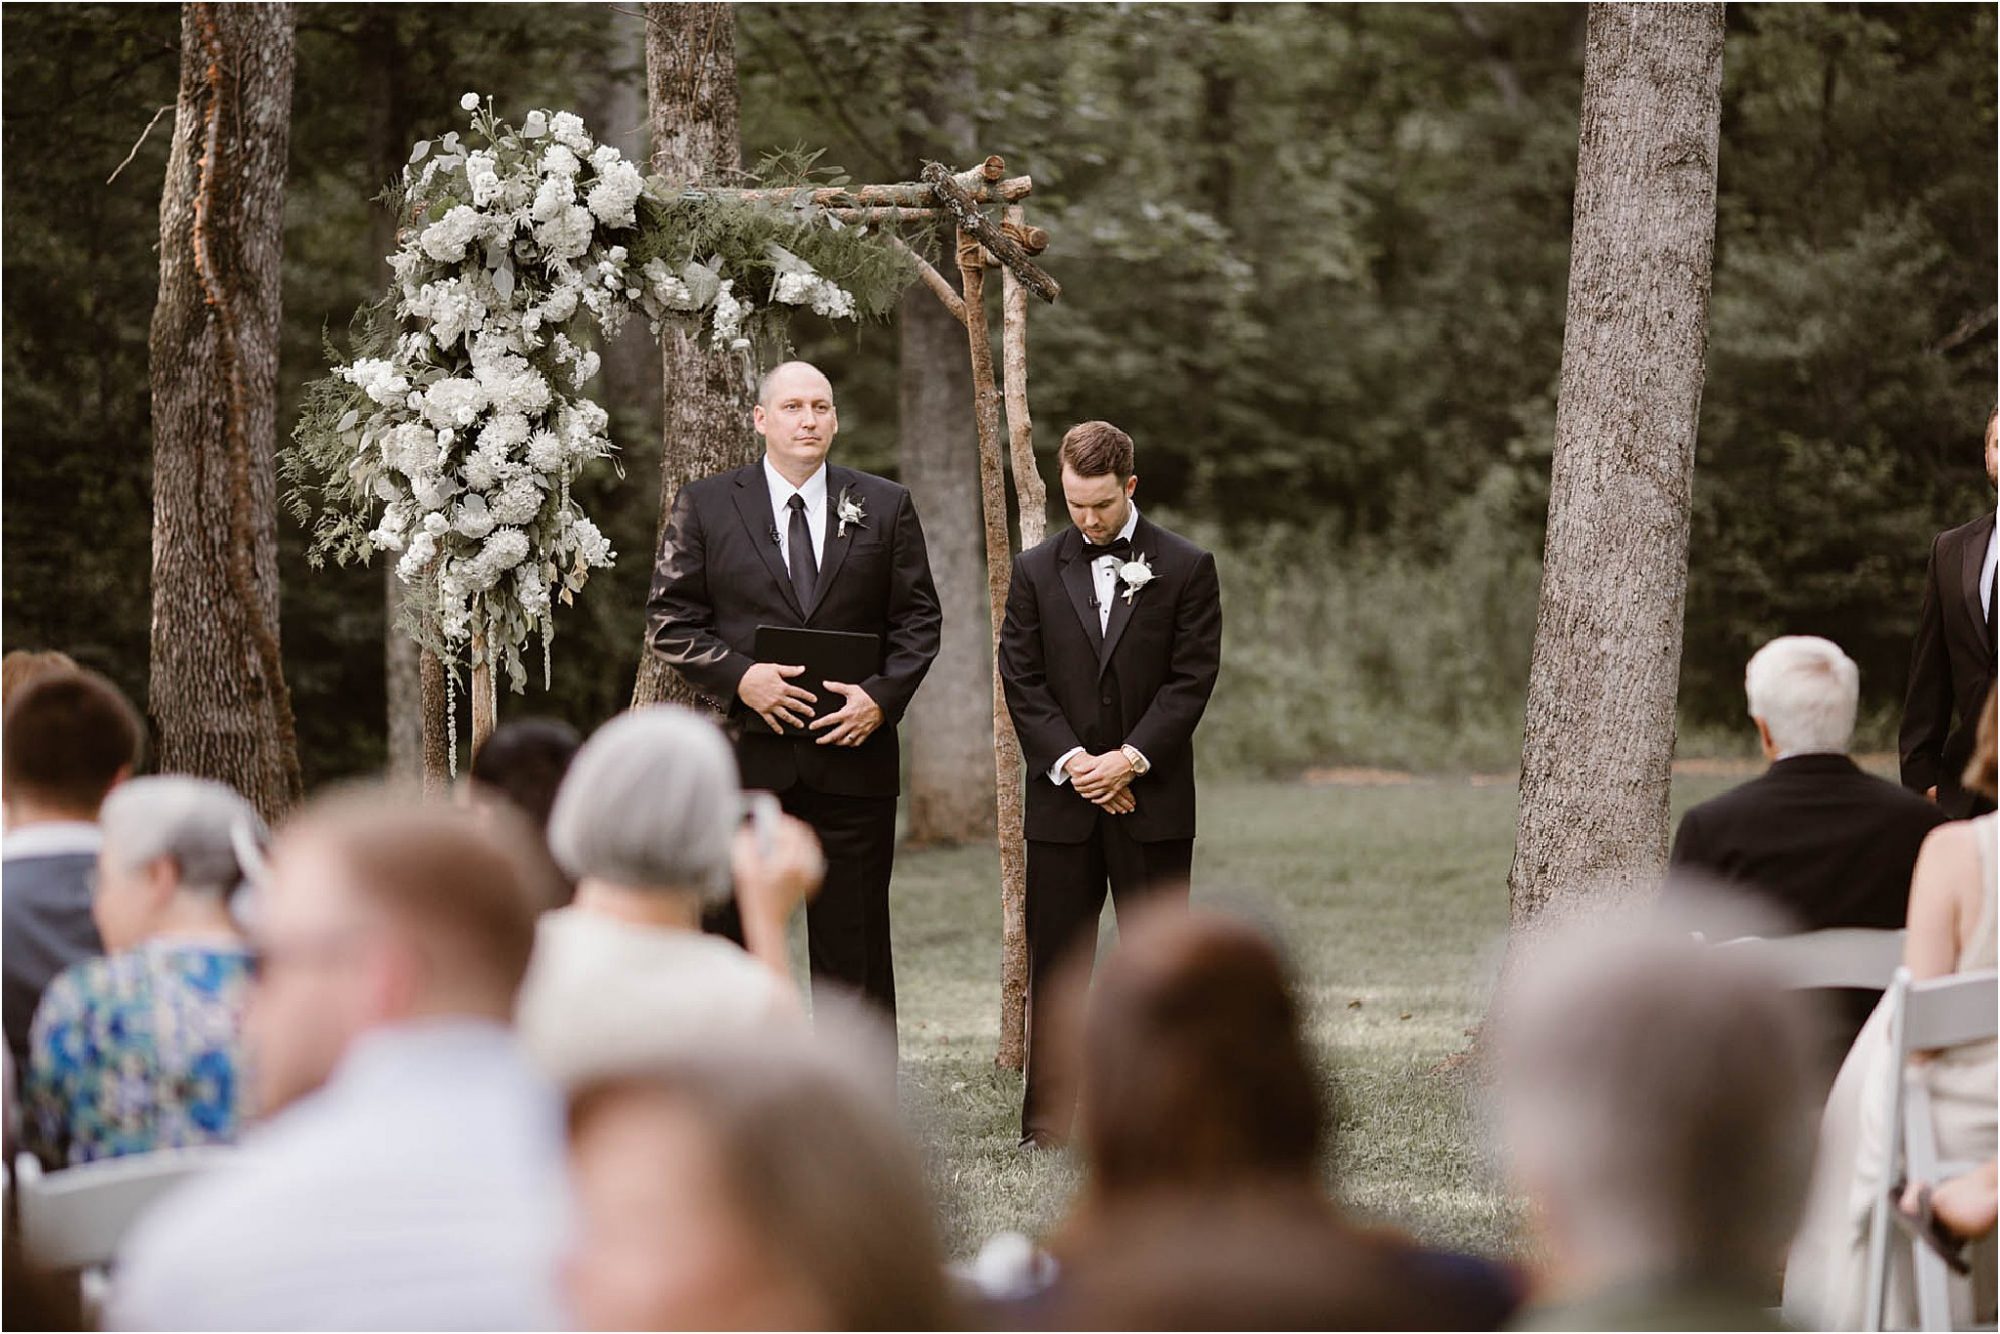 groom at ceremony waiting on bride to walk down aisle